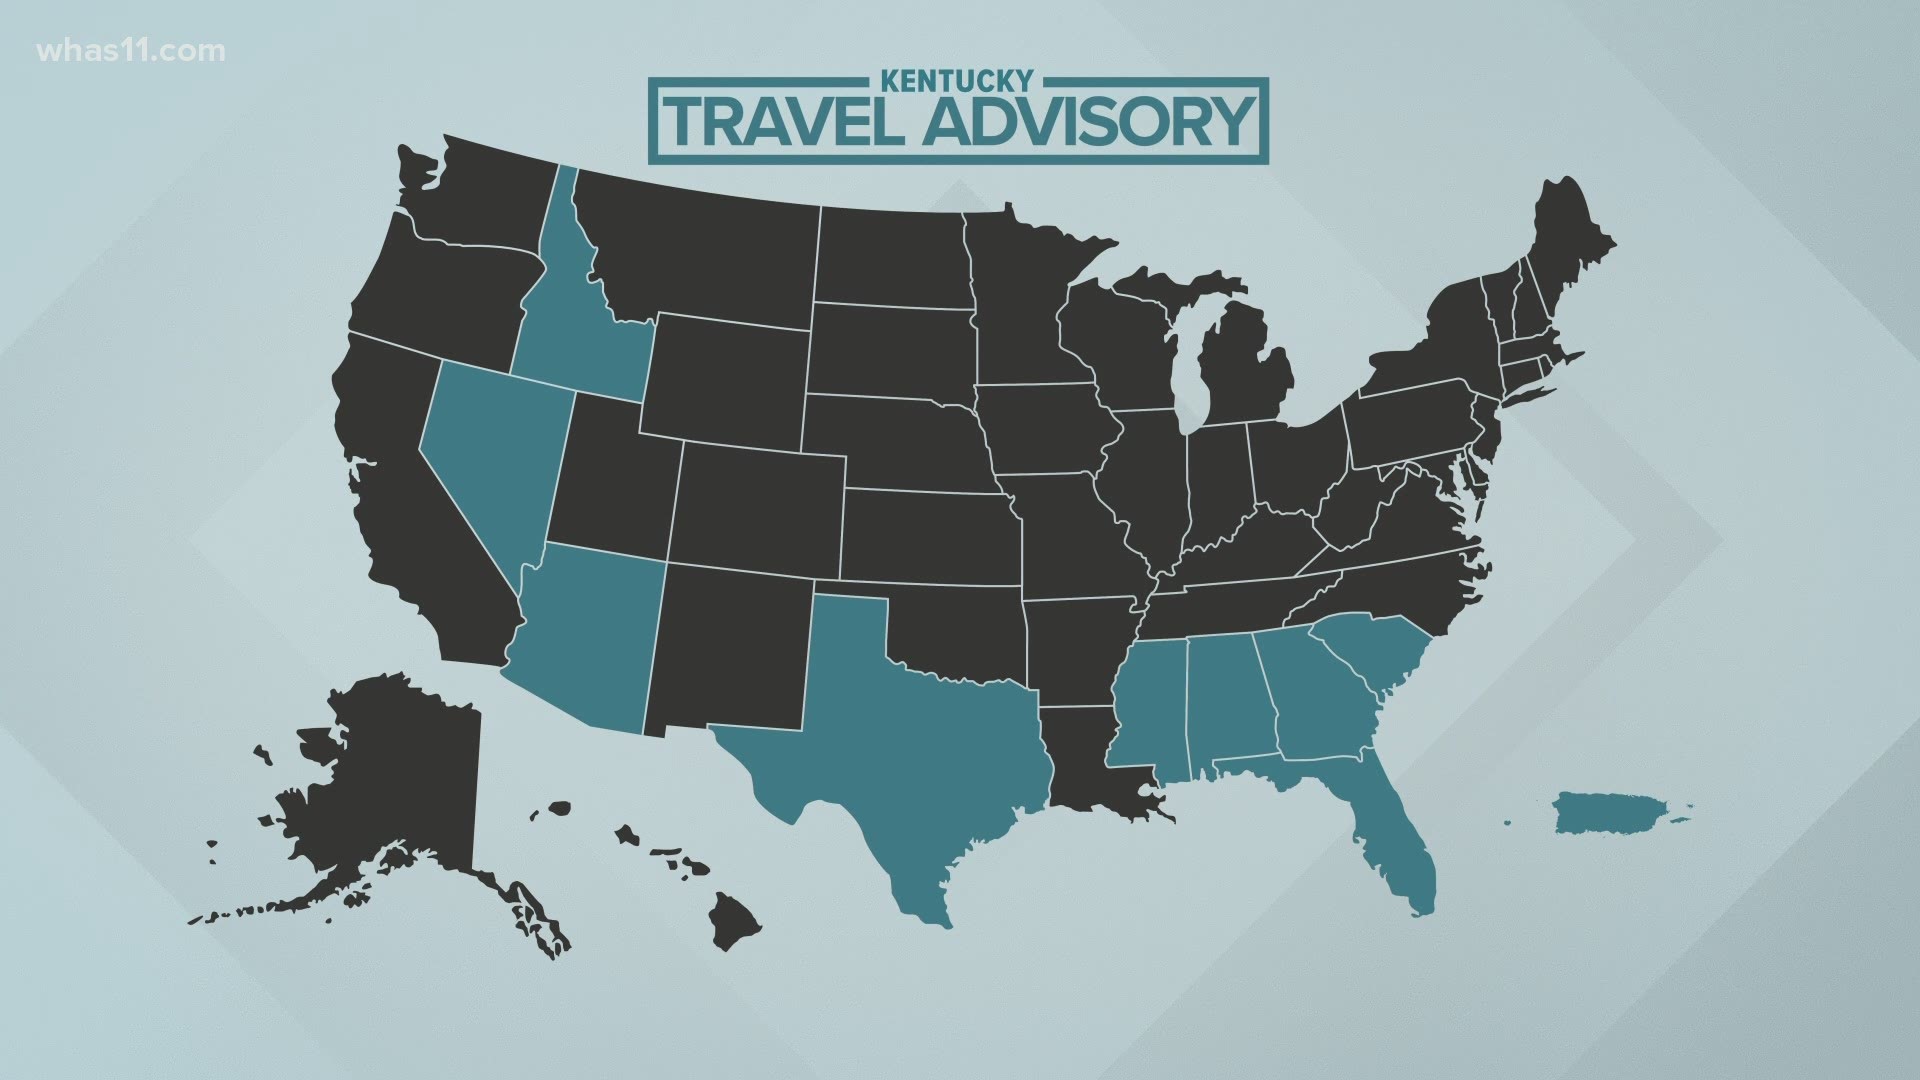 The governor issued a travel advisory for Kentuckians planning to visit states with large COVID-19 outbreaks.